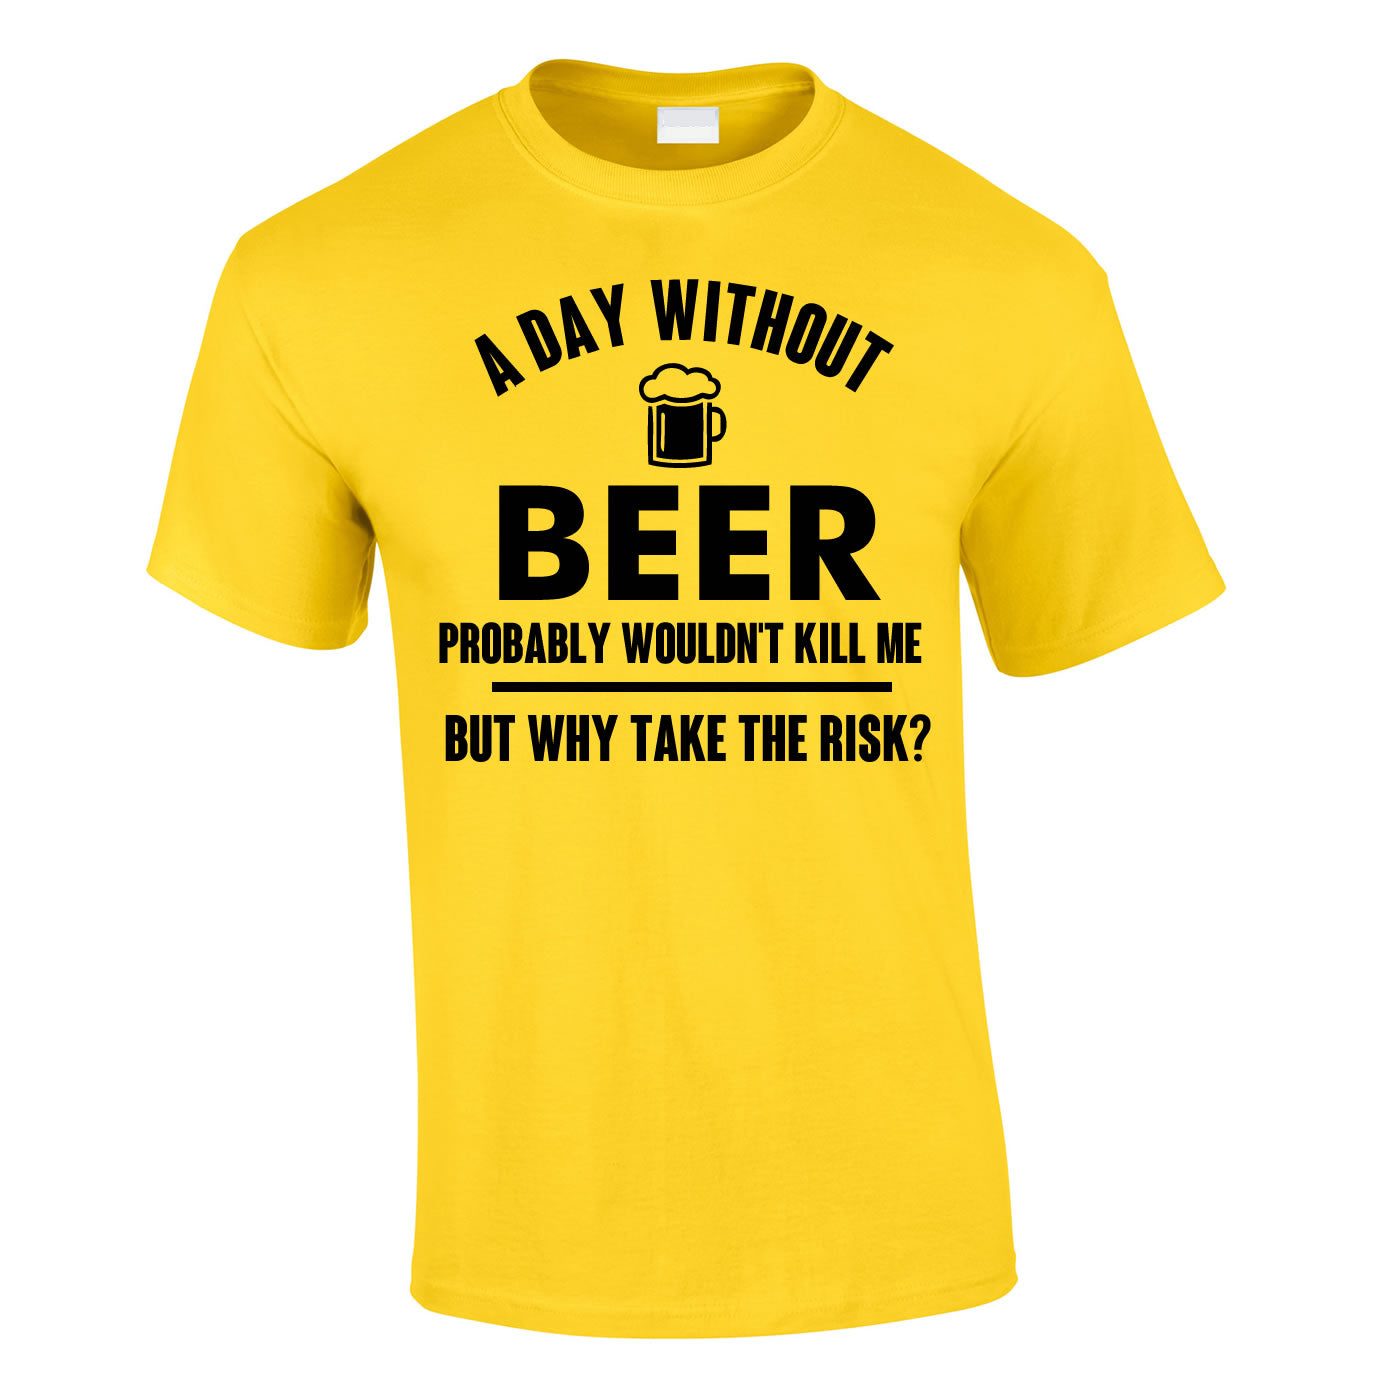 A day without beer probably wouldn't kill me t shirt